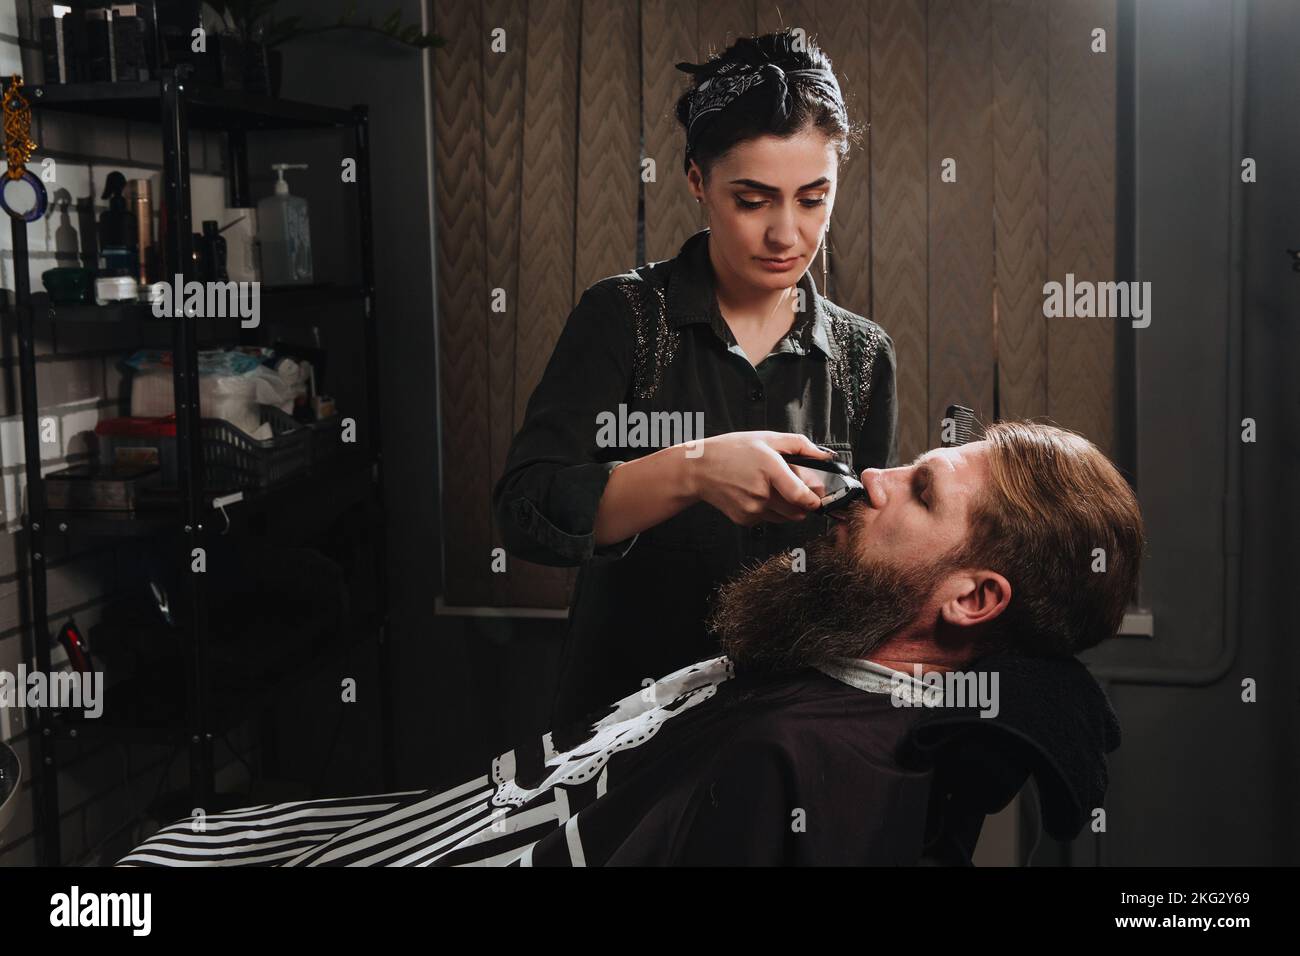 Young woman barber making haircut of bearded man in barbershop. Self-care, masculine beauty. Hair care service concept Stock Photo